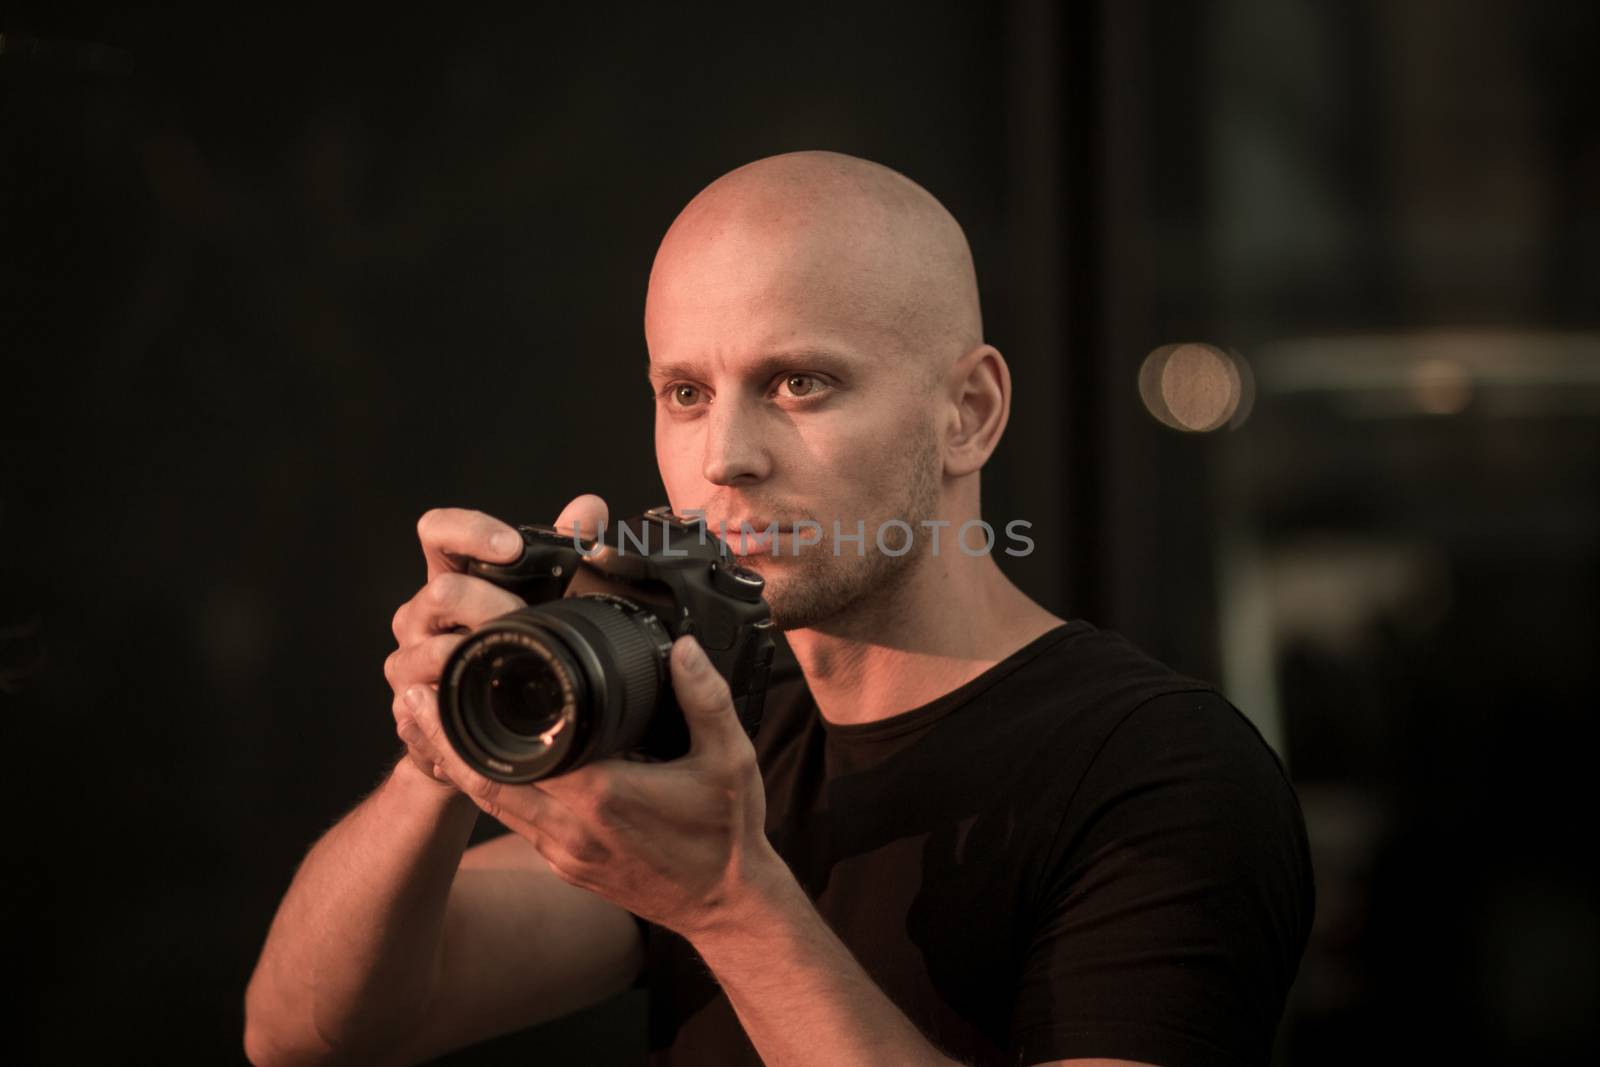 photographer at work holding camera shaved head white man by timwit